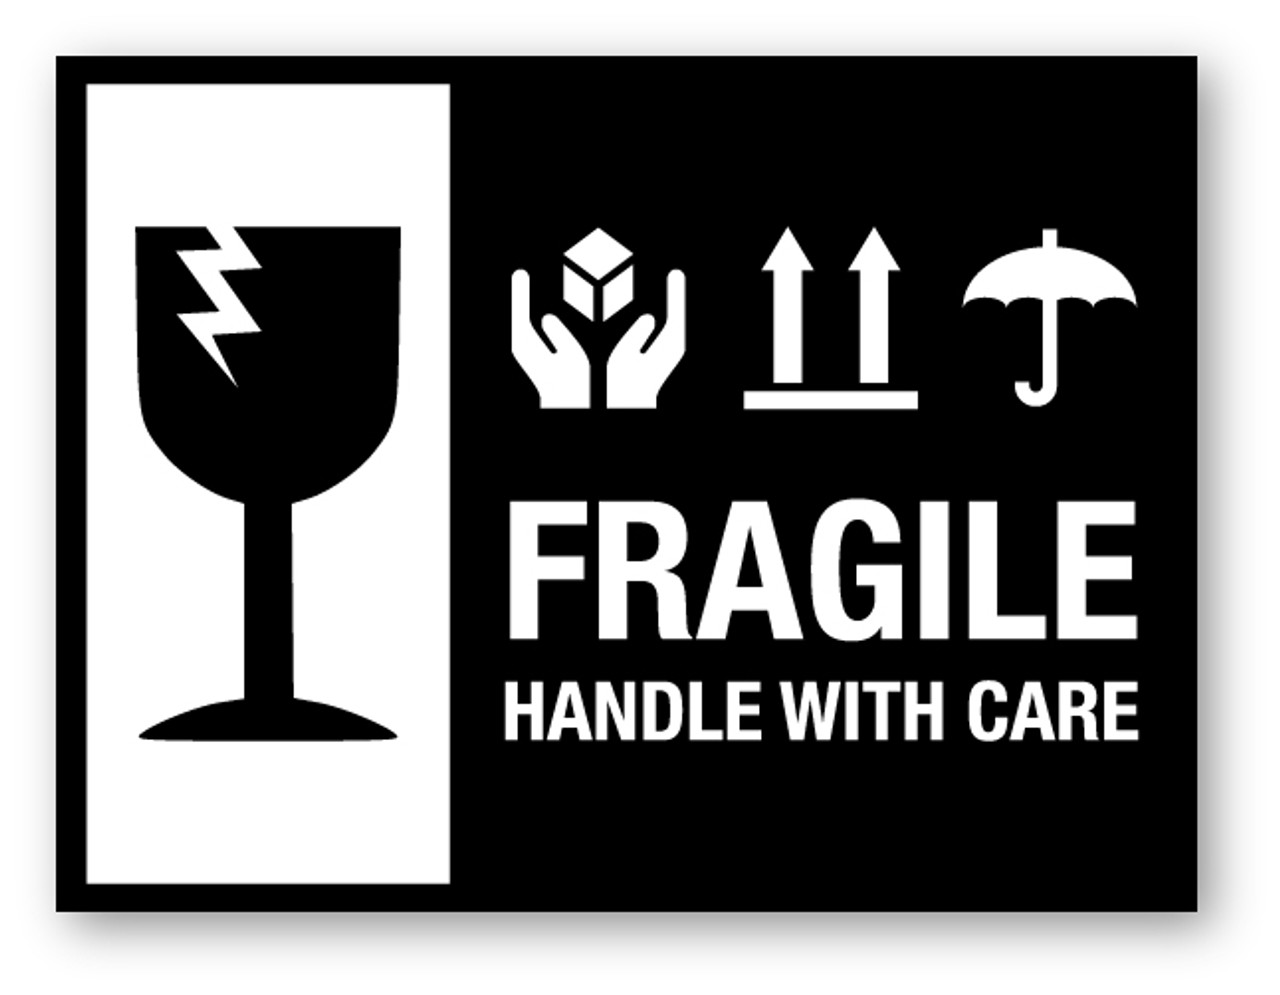 Please Handle with Care Glass, Shipping and Storage Stencil